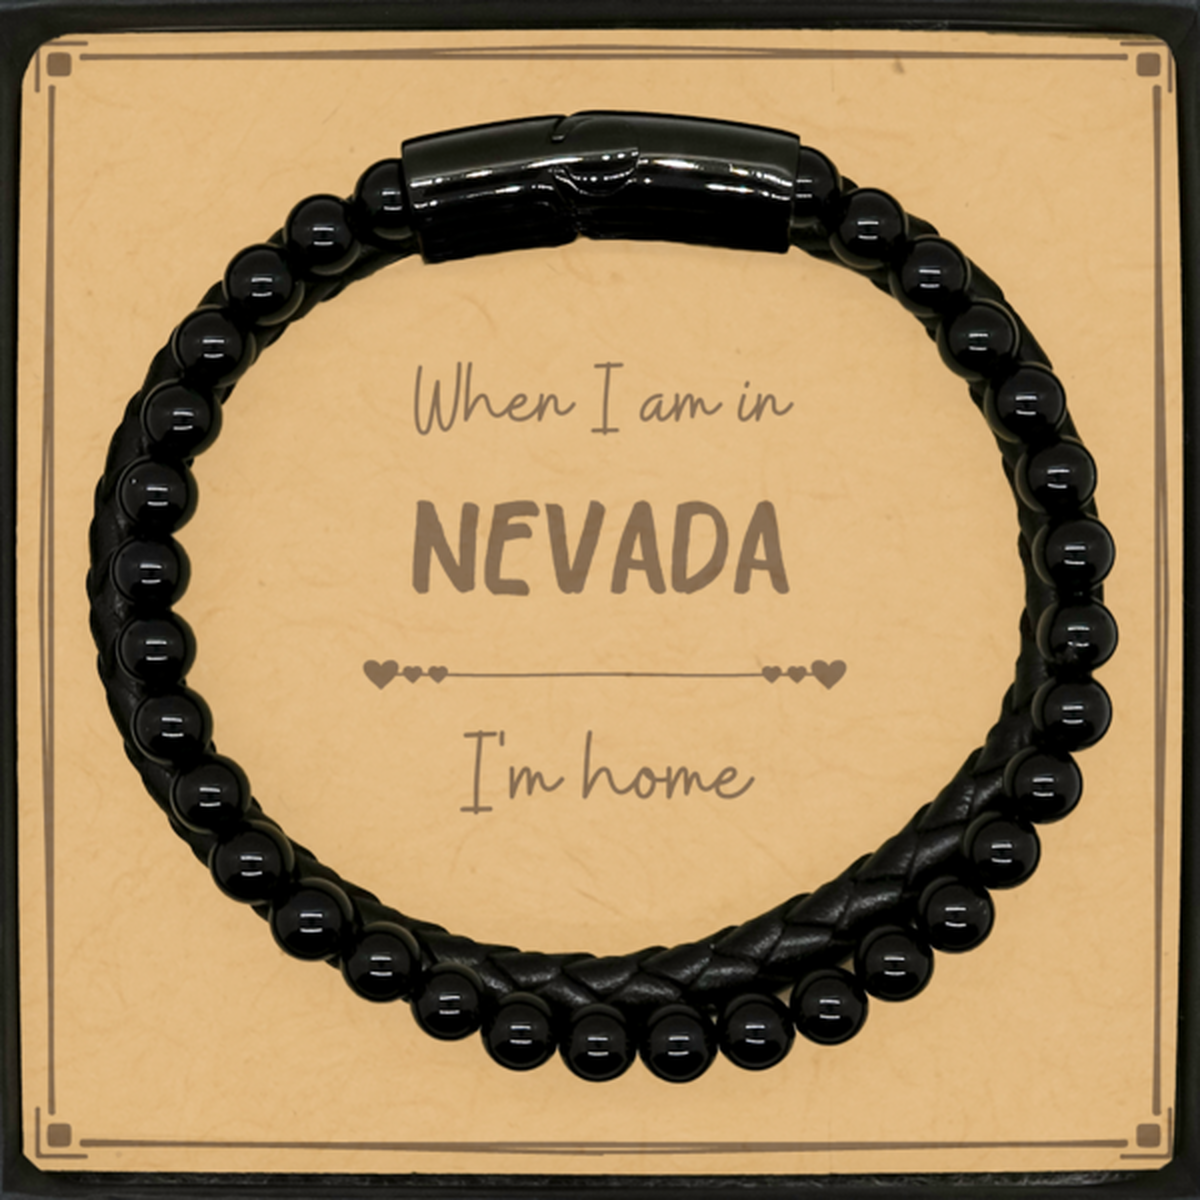 When I am in Nevada I'm home Stone Leather Bracelets, Message Card Gifts For Nevada, State Nevada Birthday Gifts for Friends Coworker